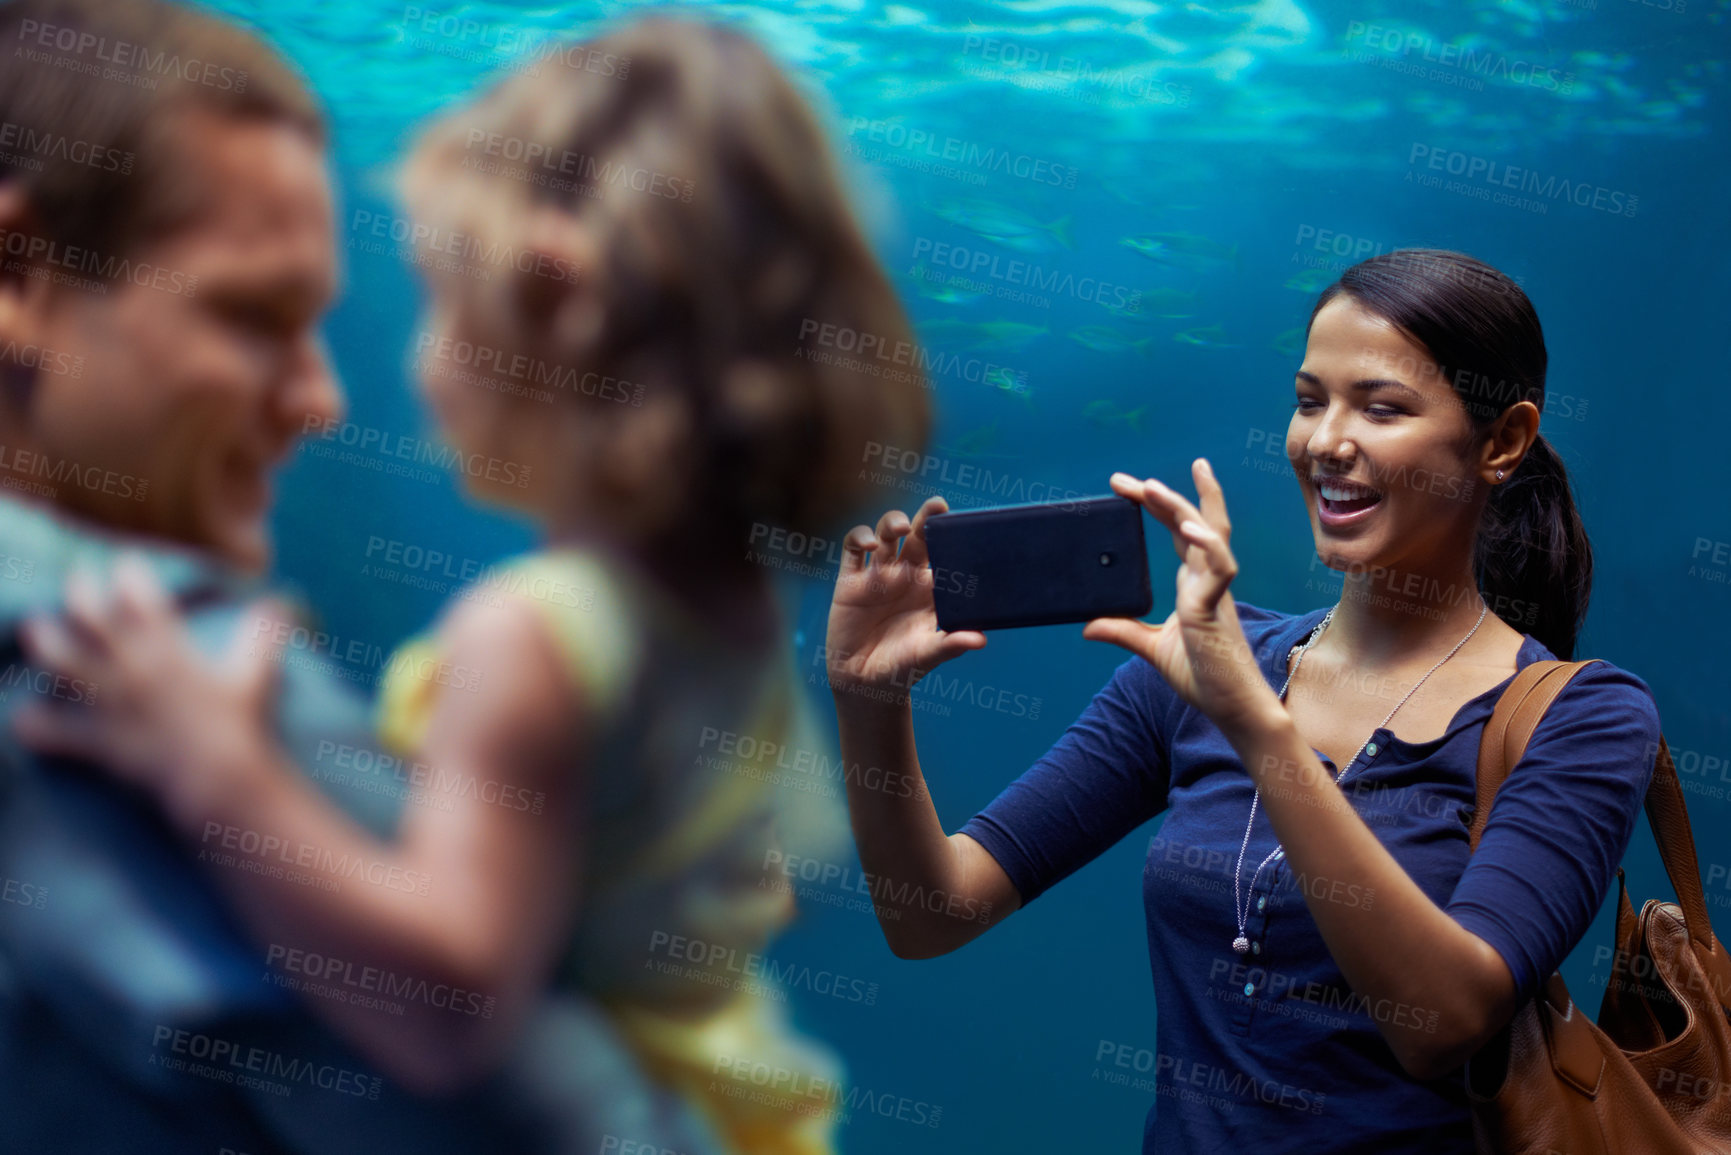 Buy stock photo Aquarium, woman or phone for photo, family or outing for fun, happy or bonding together in Brazil. People, smartphone and fish tank for social media, exploration and marine life on playful weekend